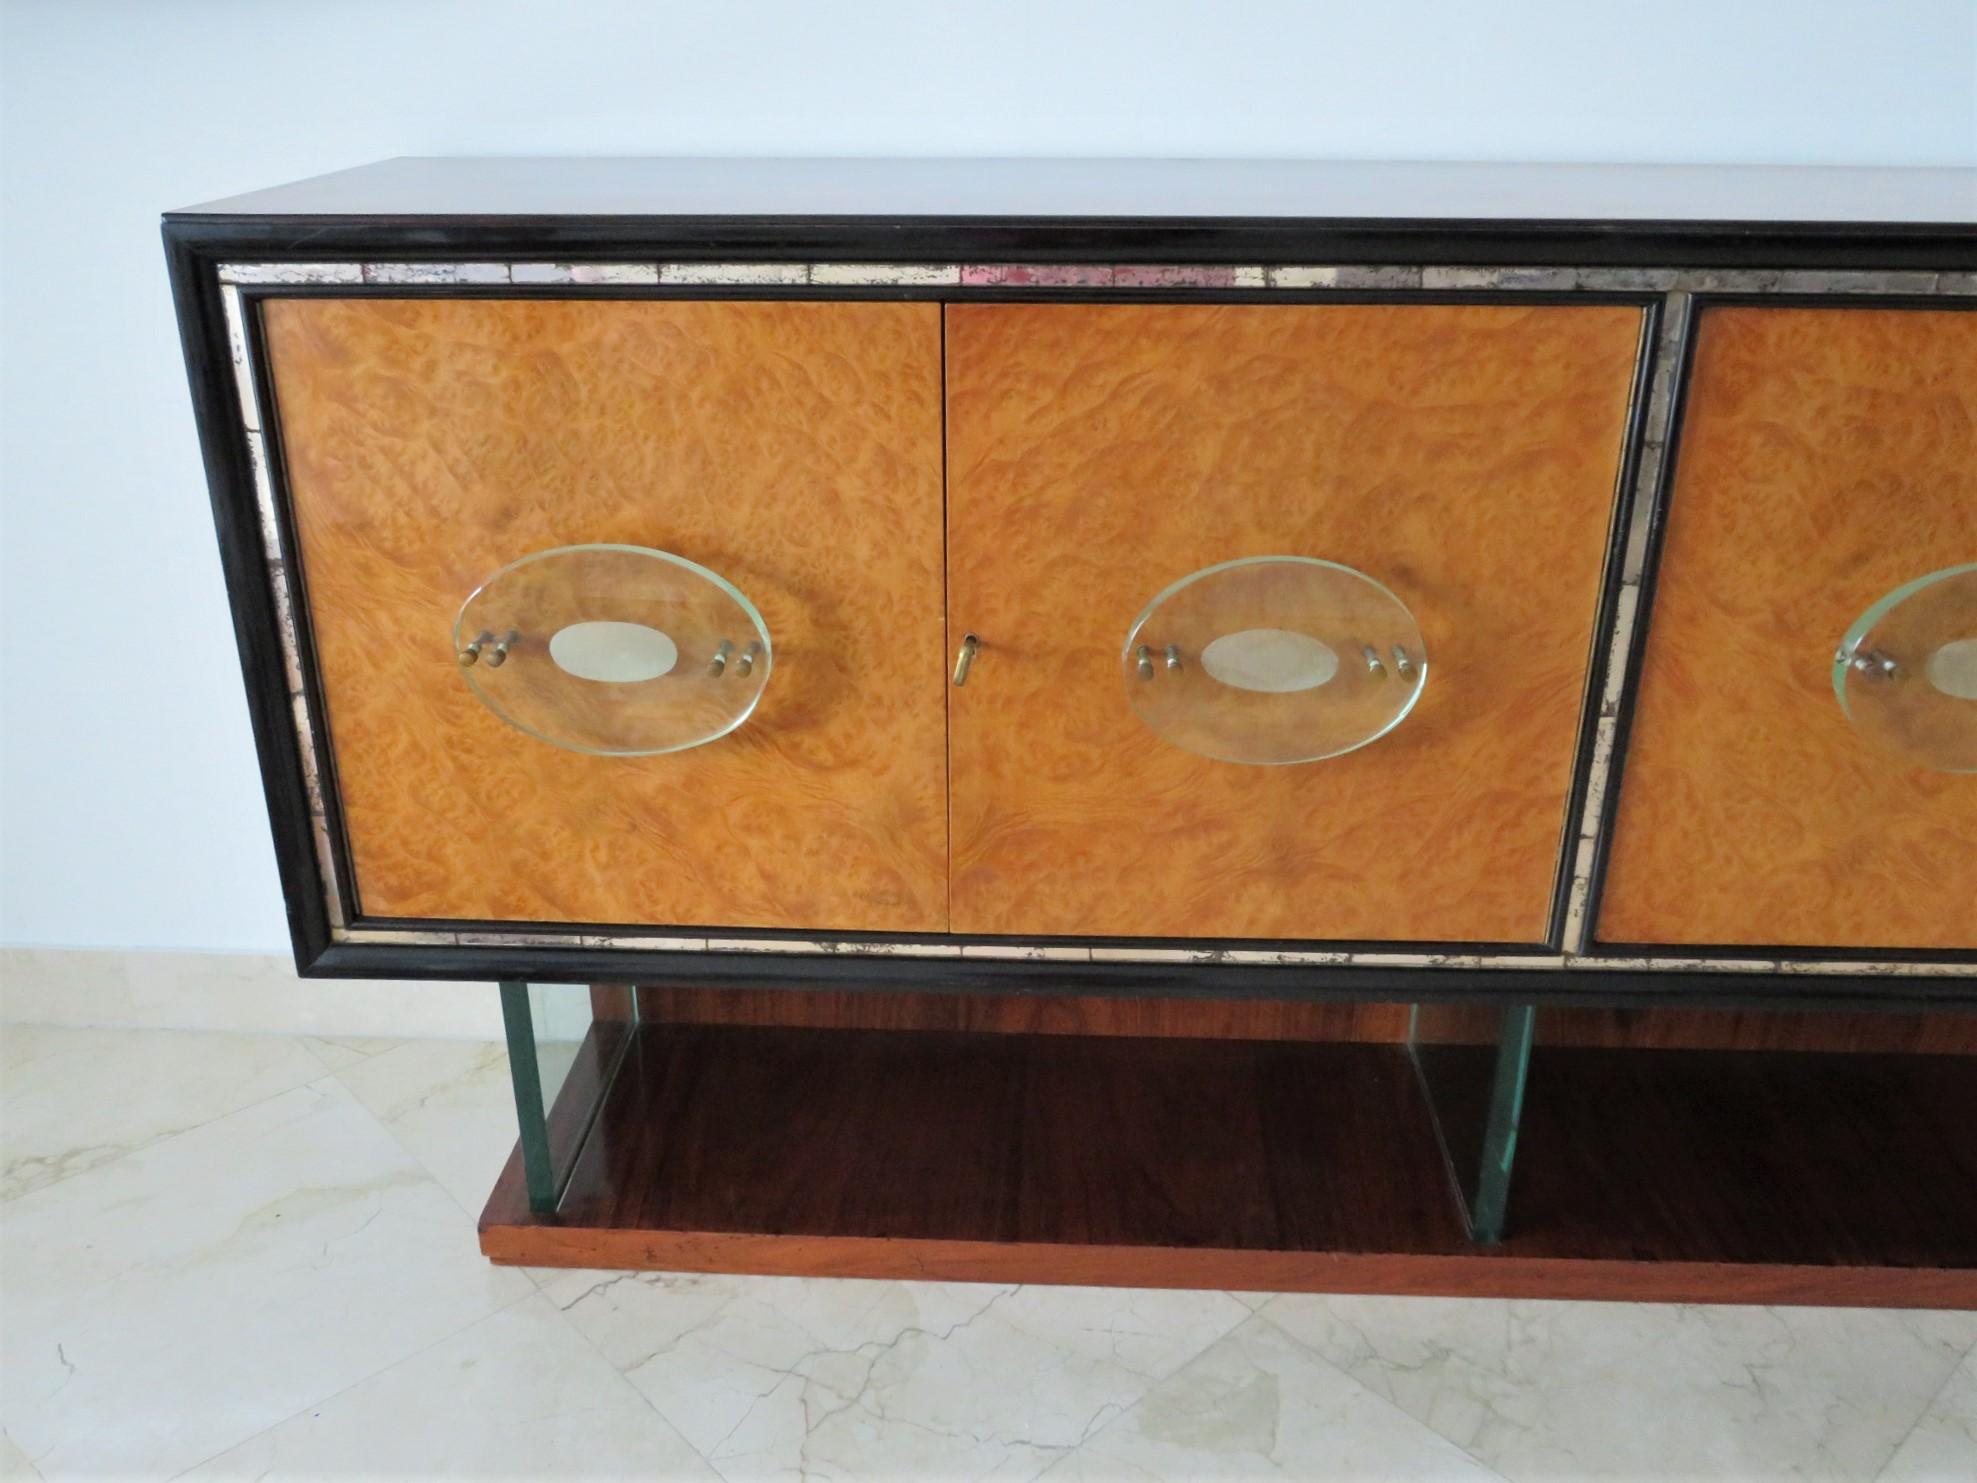 Palisander Italian Art Deco Modern Credenza Cabinet with Fontana Arte Handles and Supports